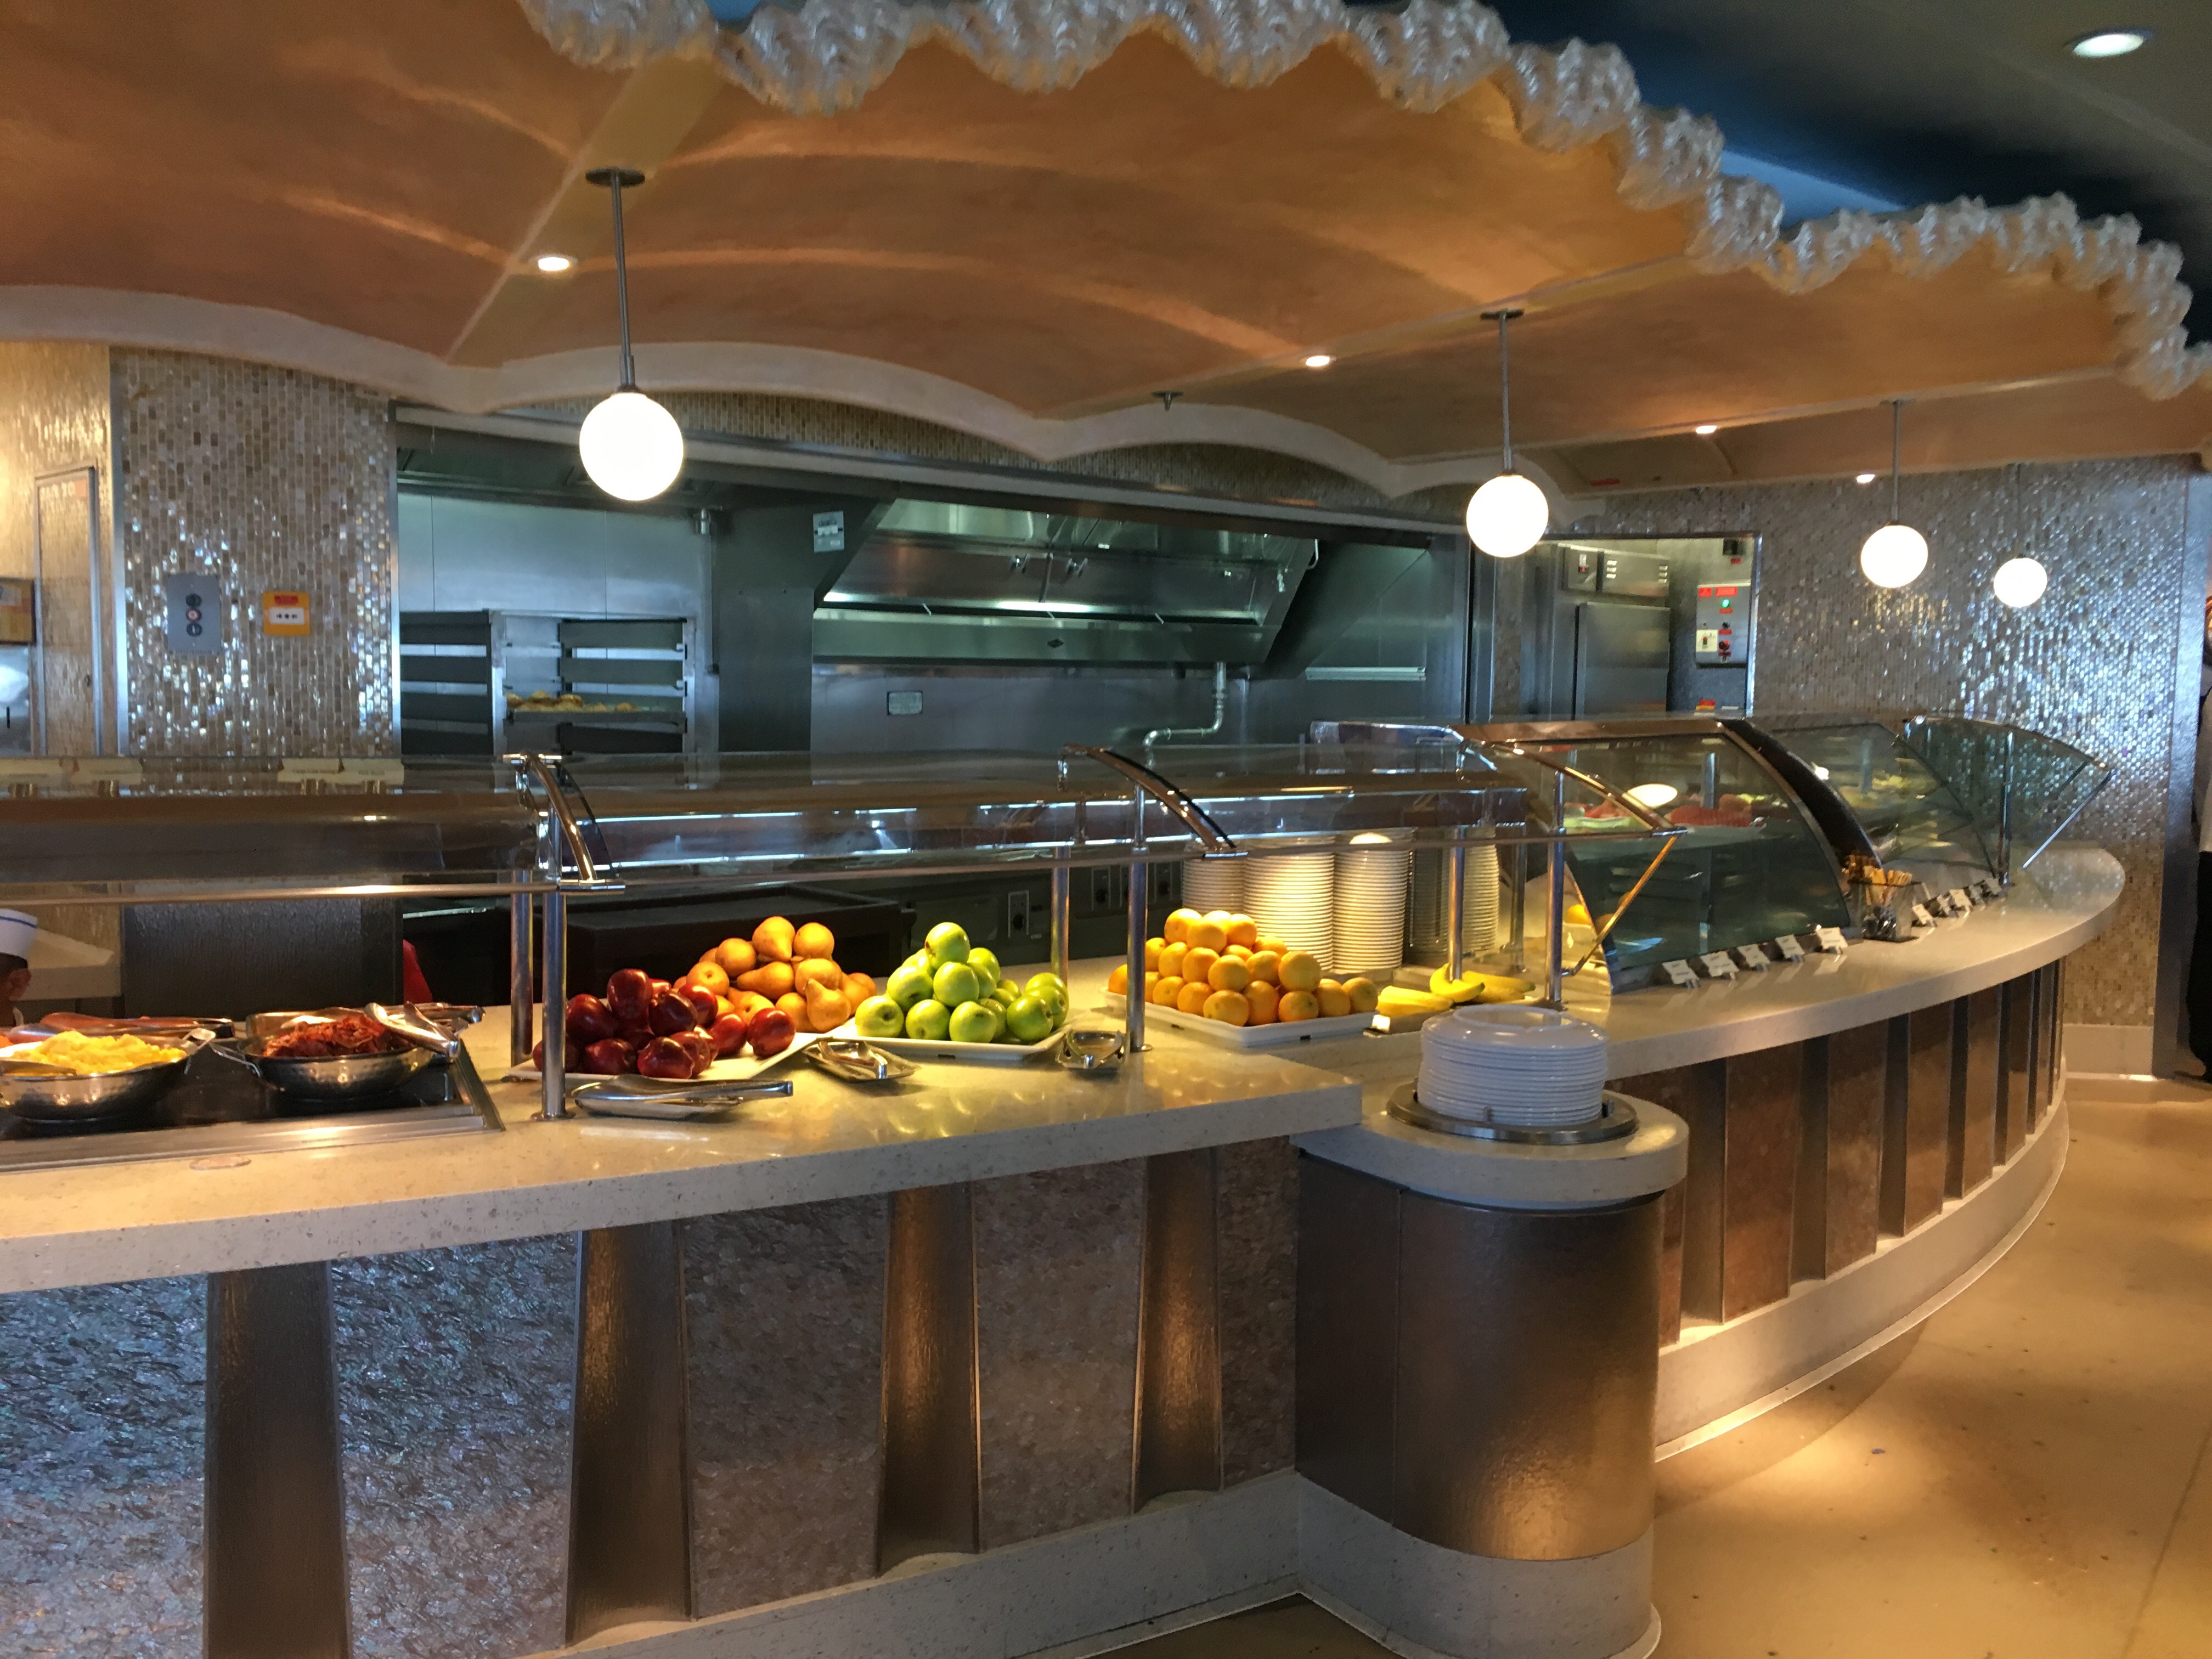 25 Tips to Save BIG on Your Next Cruise - cruise buffet